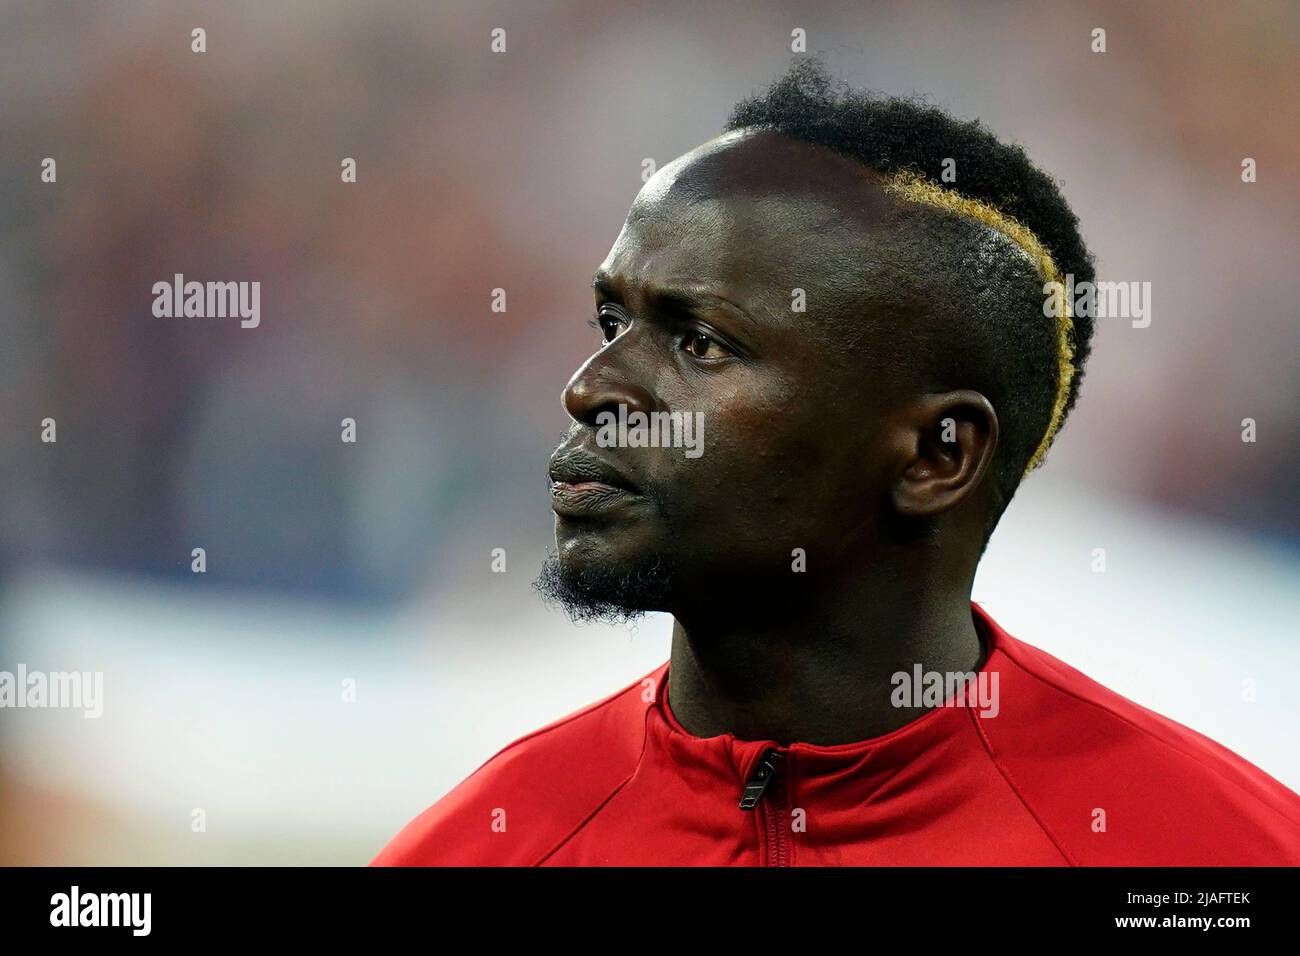 Sadio Mane of Liverpool FC during the UEFA Champions League Final match between Liverpool FC and Real Madrid played at Stade de France on May 28, 2022 in Paris, France. (Photo / Magma) Stock Photo